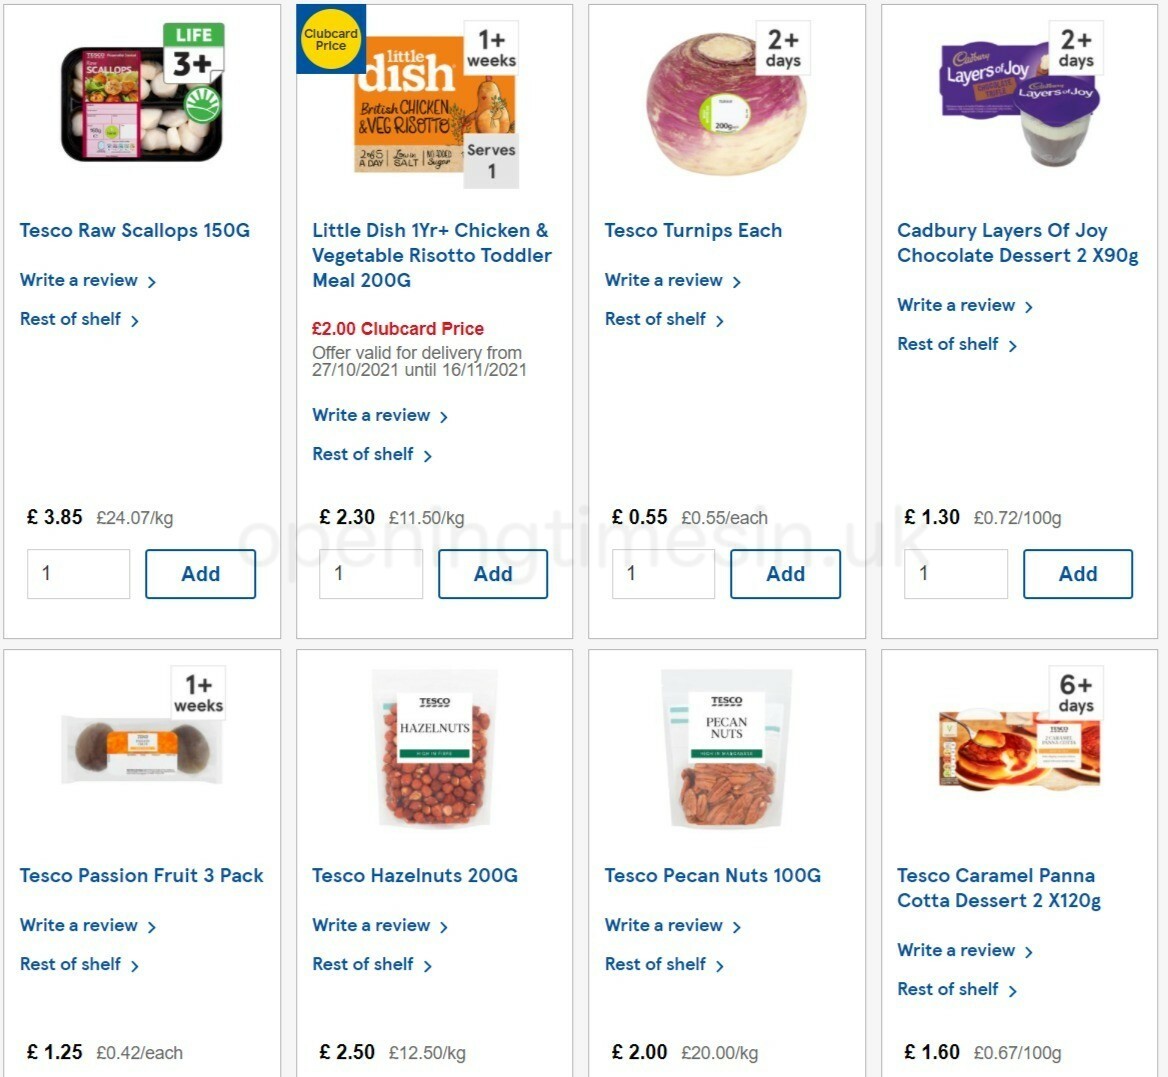 TESCO Offers from 27 October